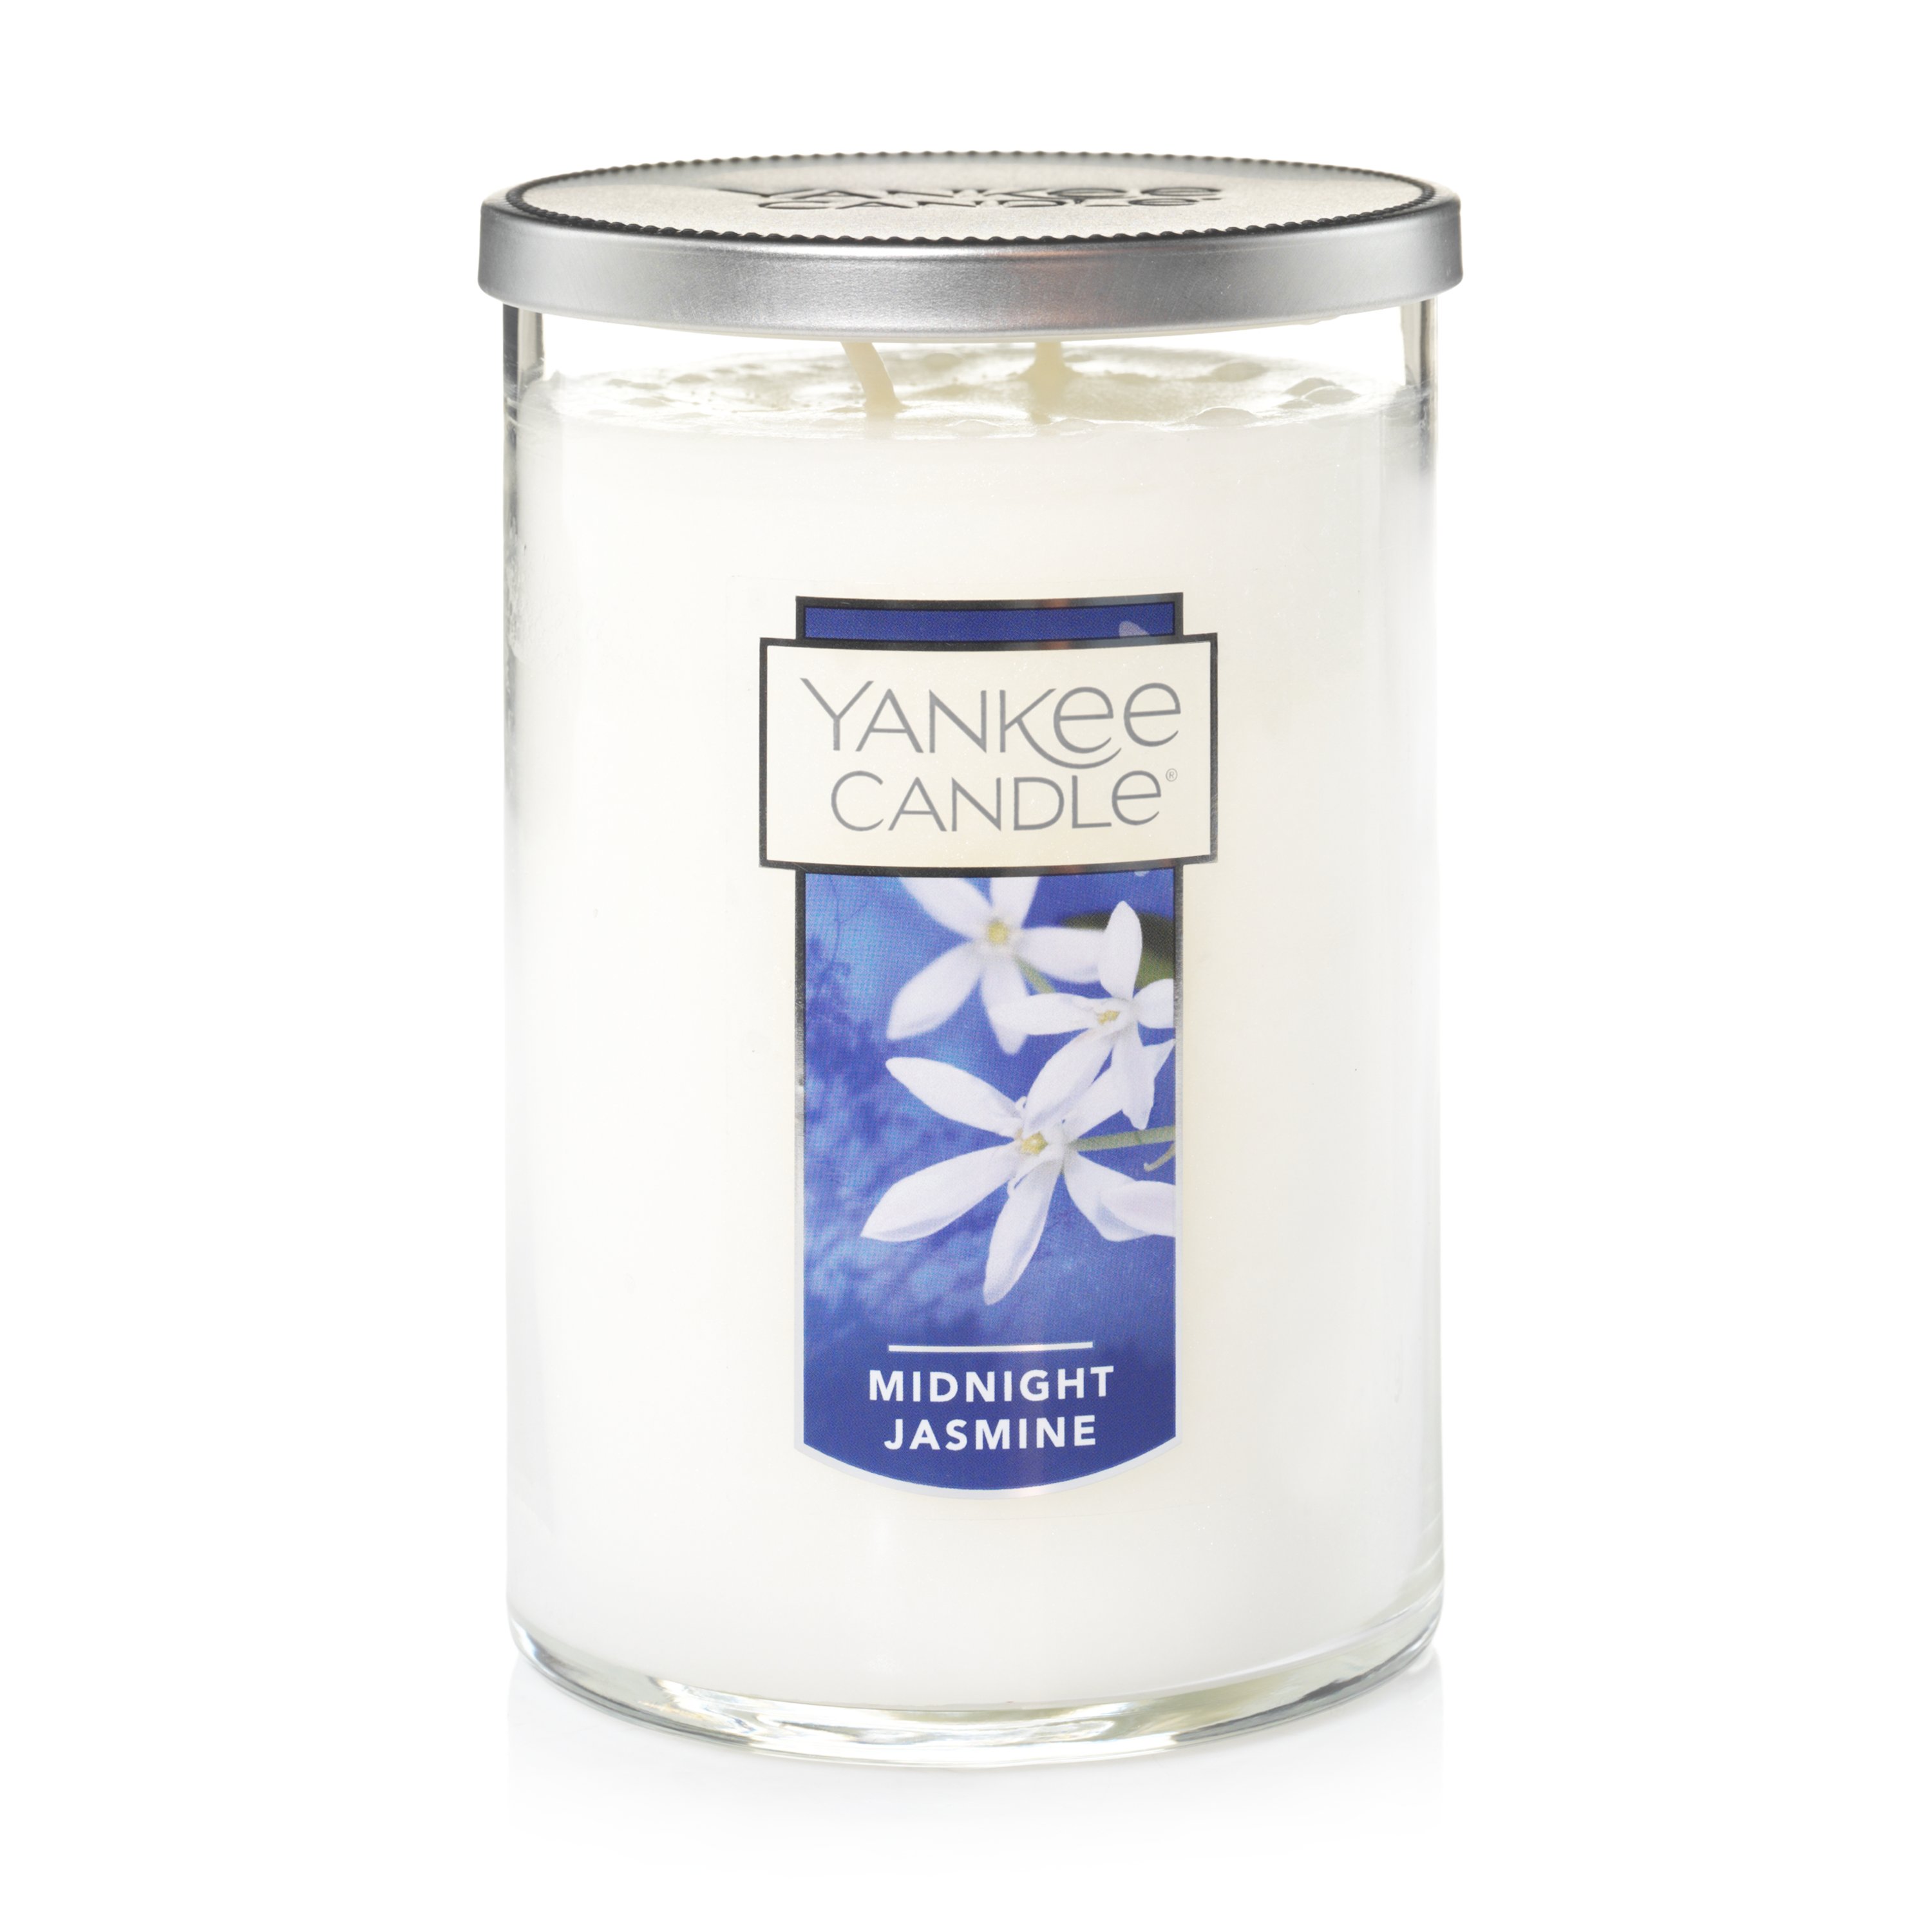 Midnight Jasmine Large 2-Wick Tumbler Candles - Large 2-Wick 